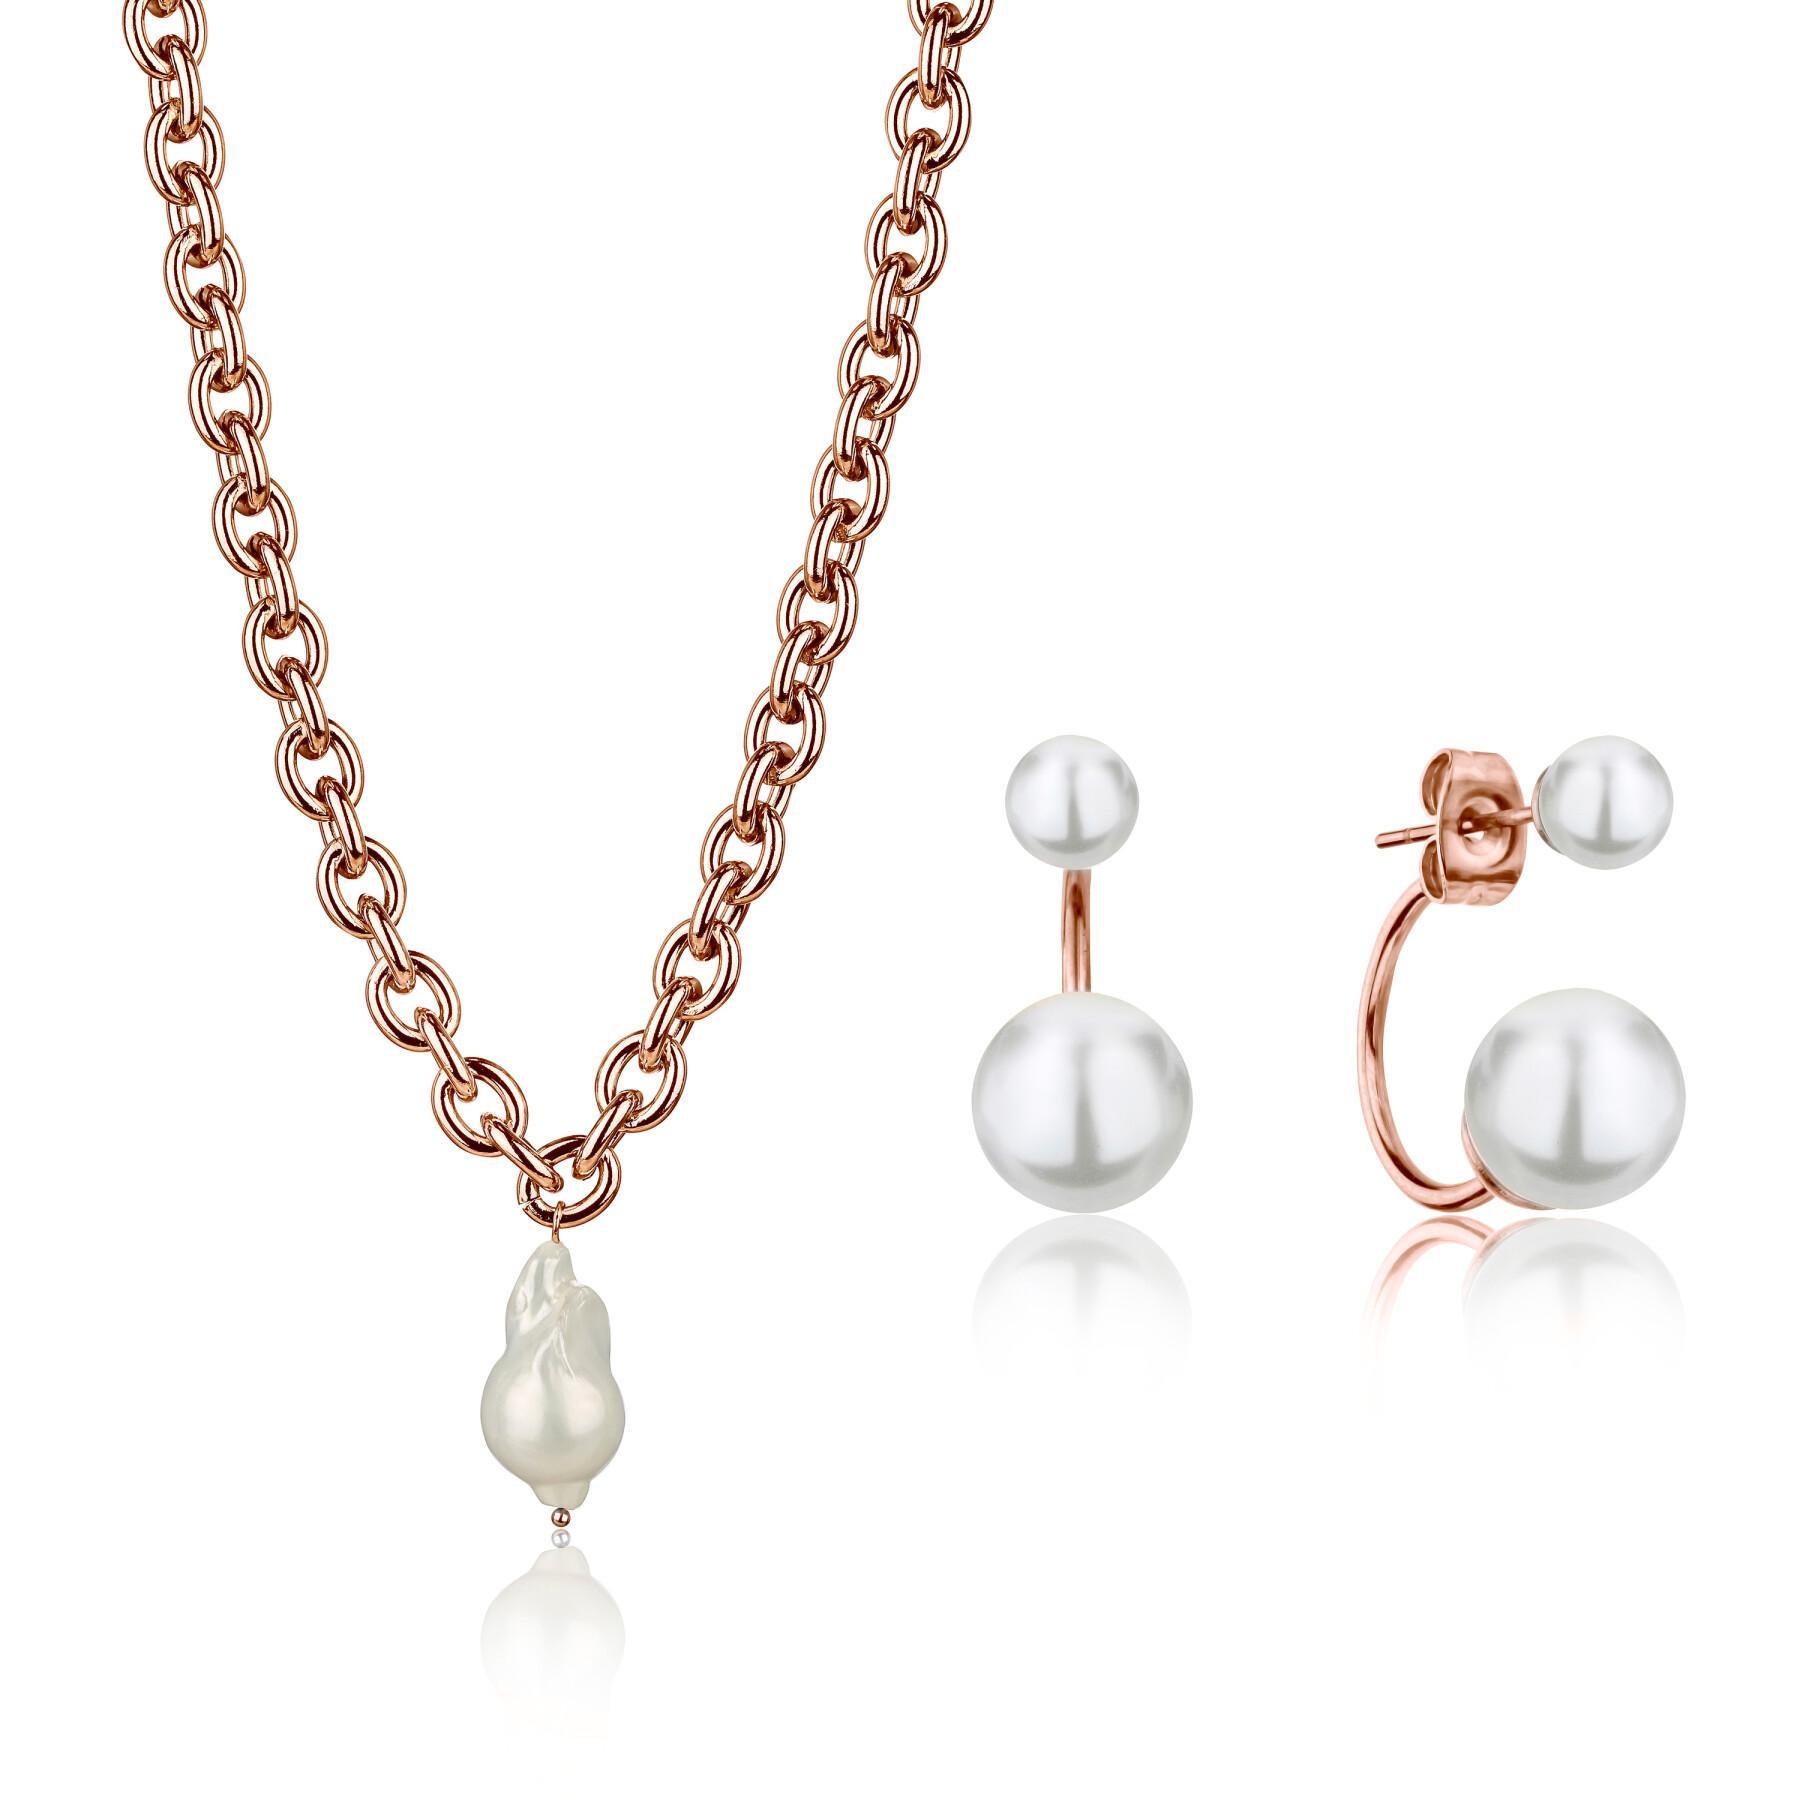 Necklace and earrings set Isabella Ford Morgan Pearl